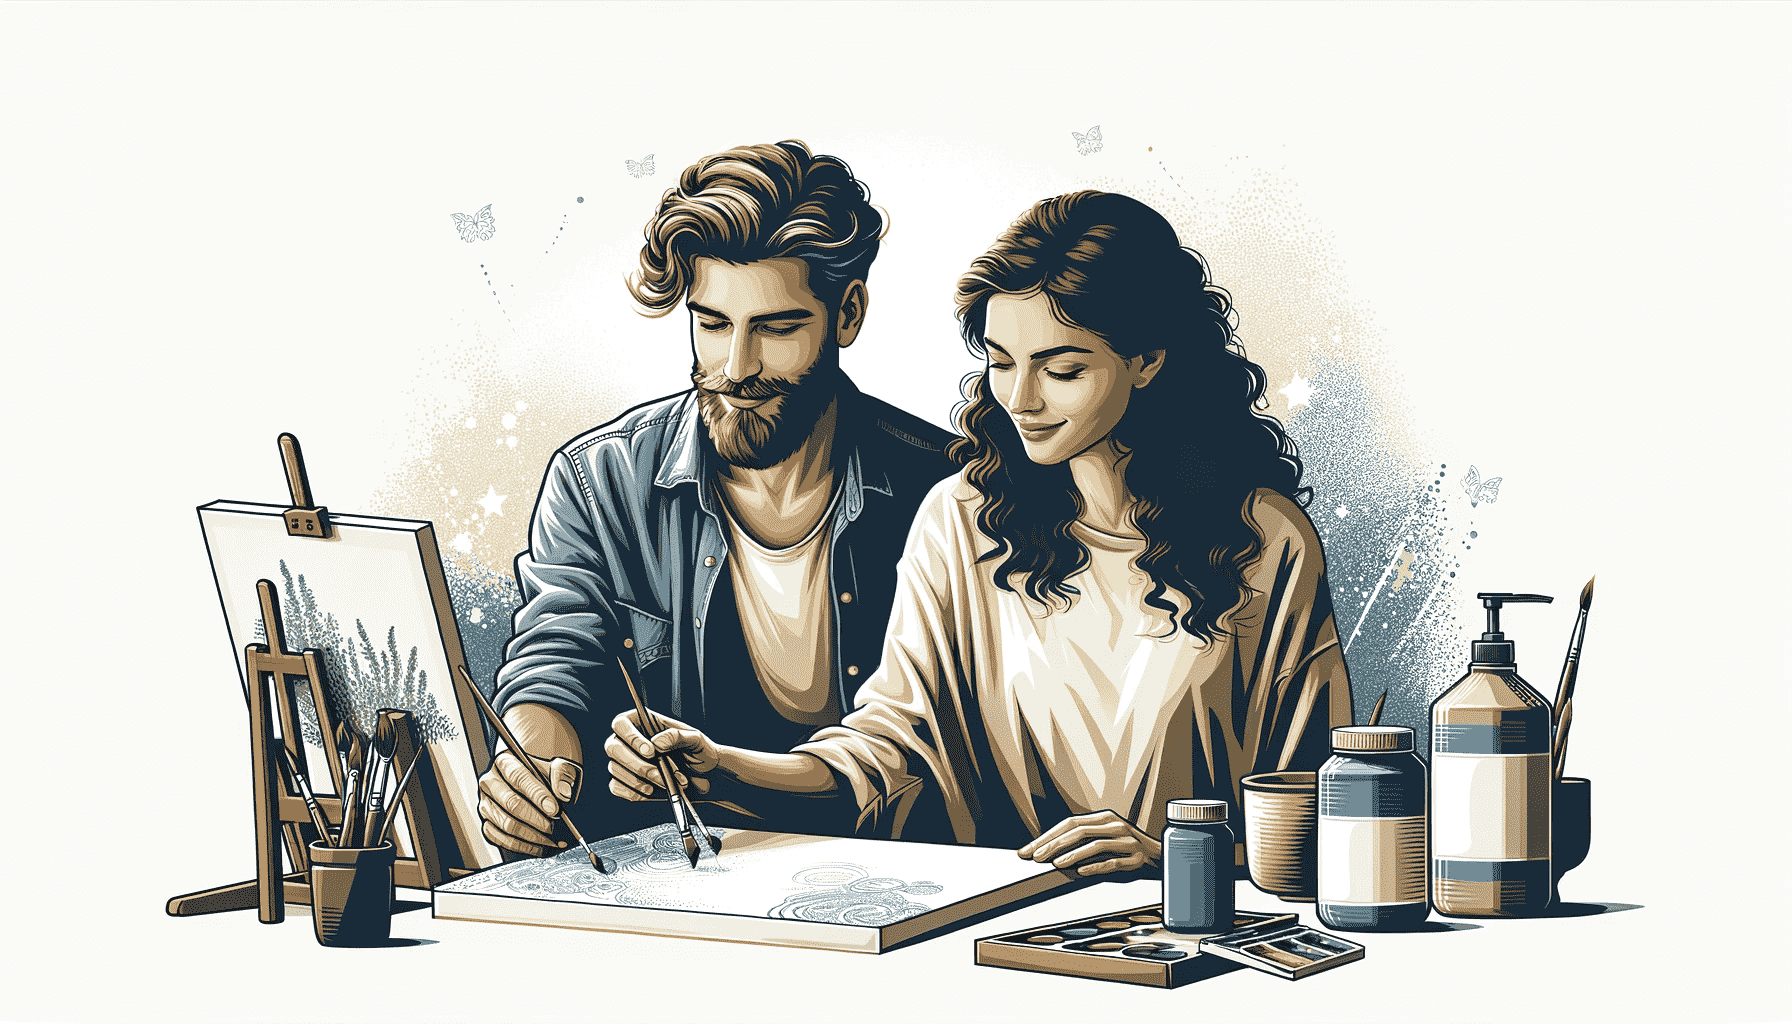 couple engaged in creative activity